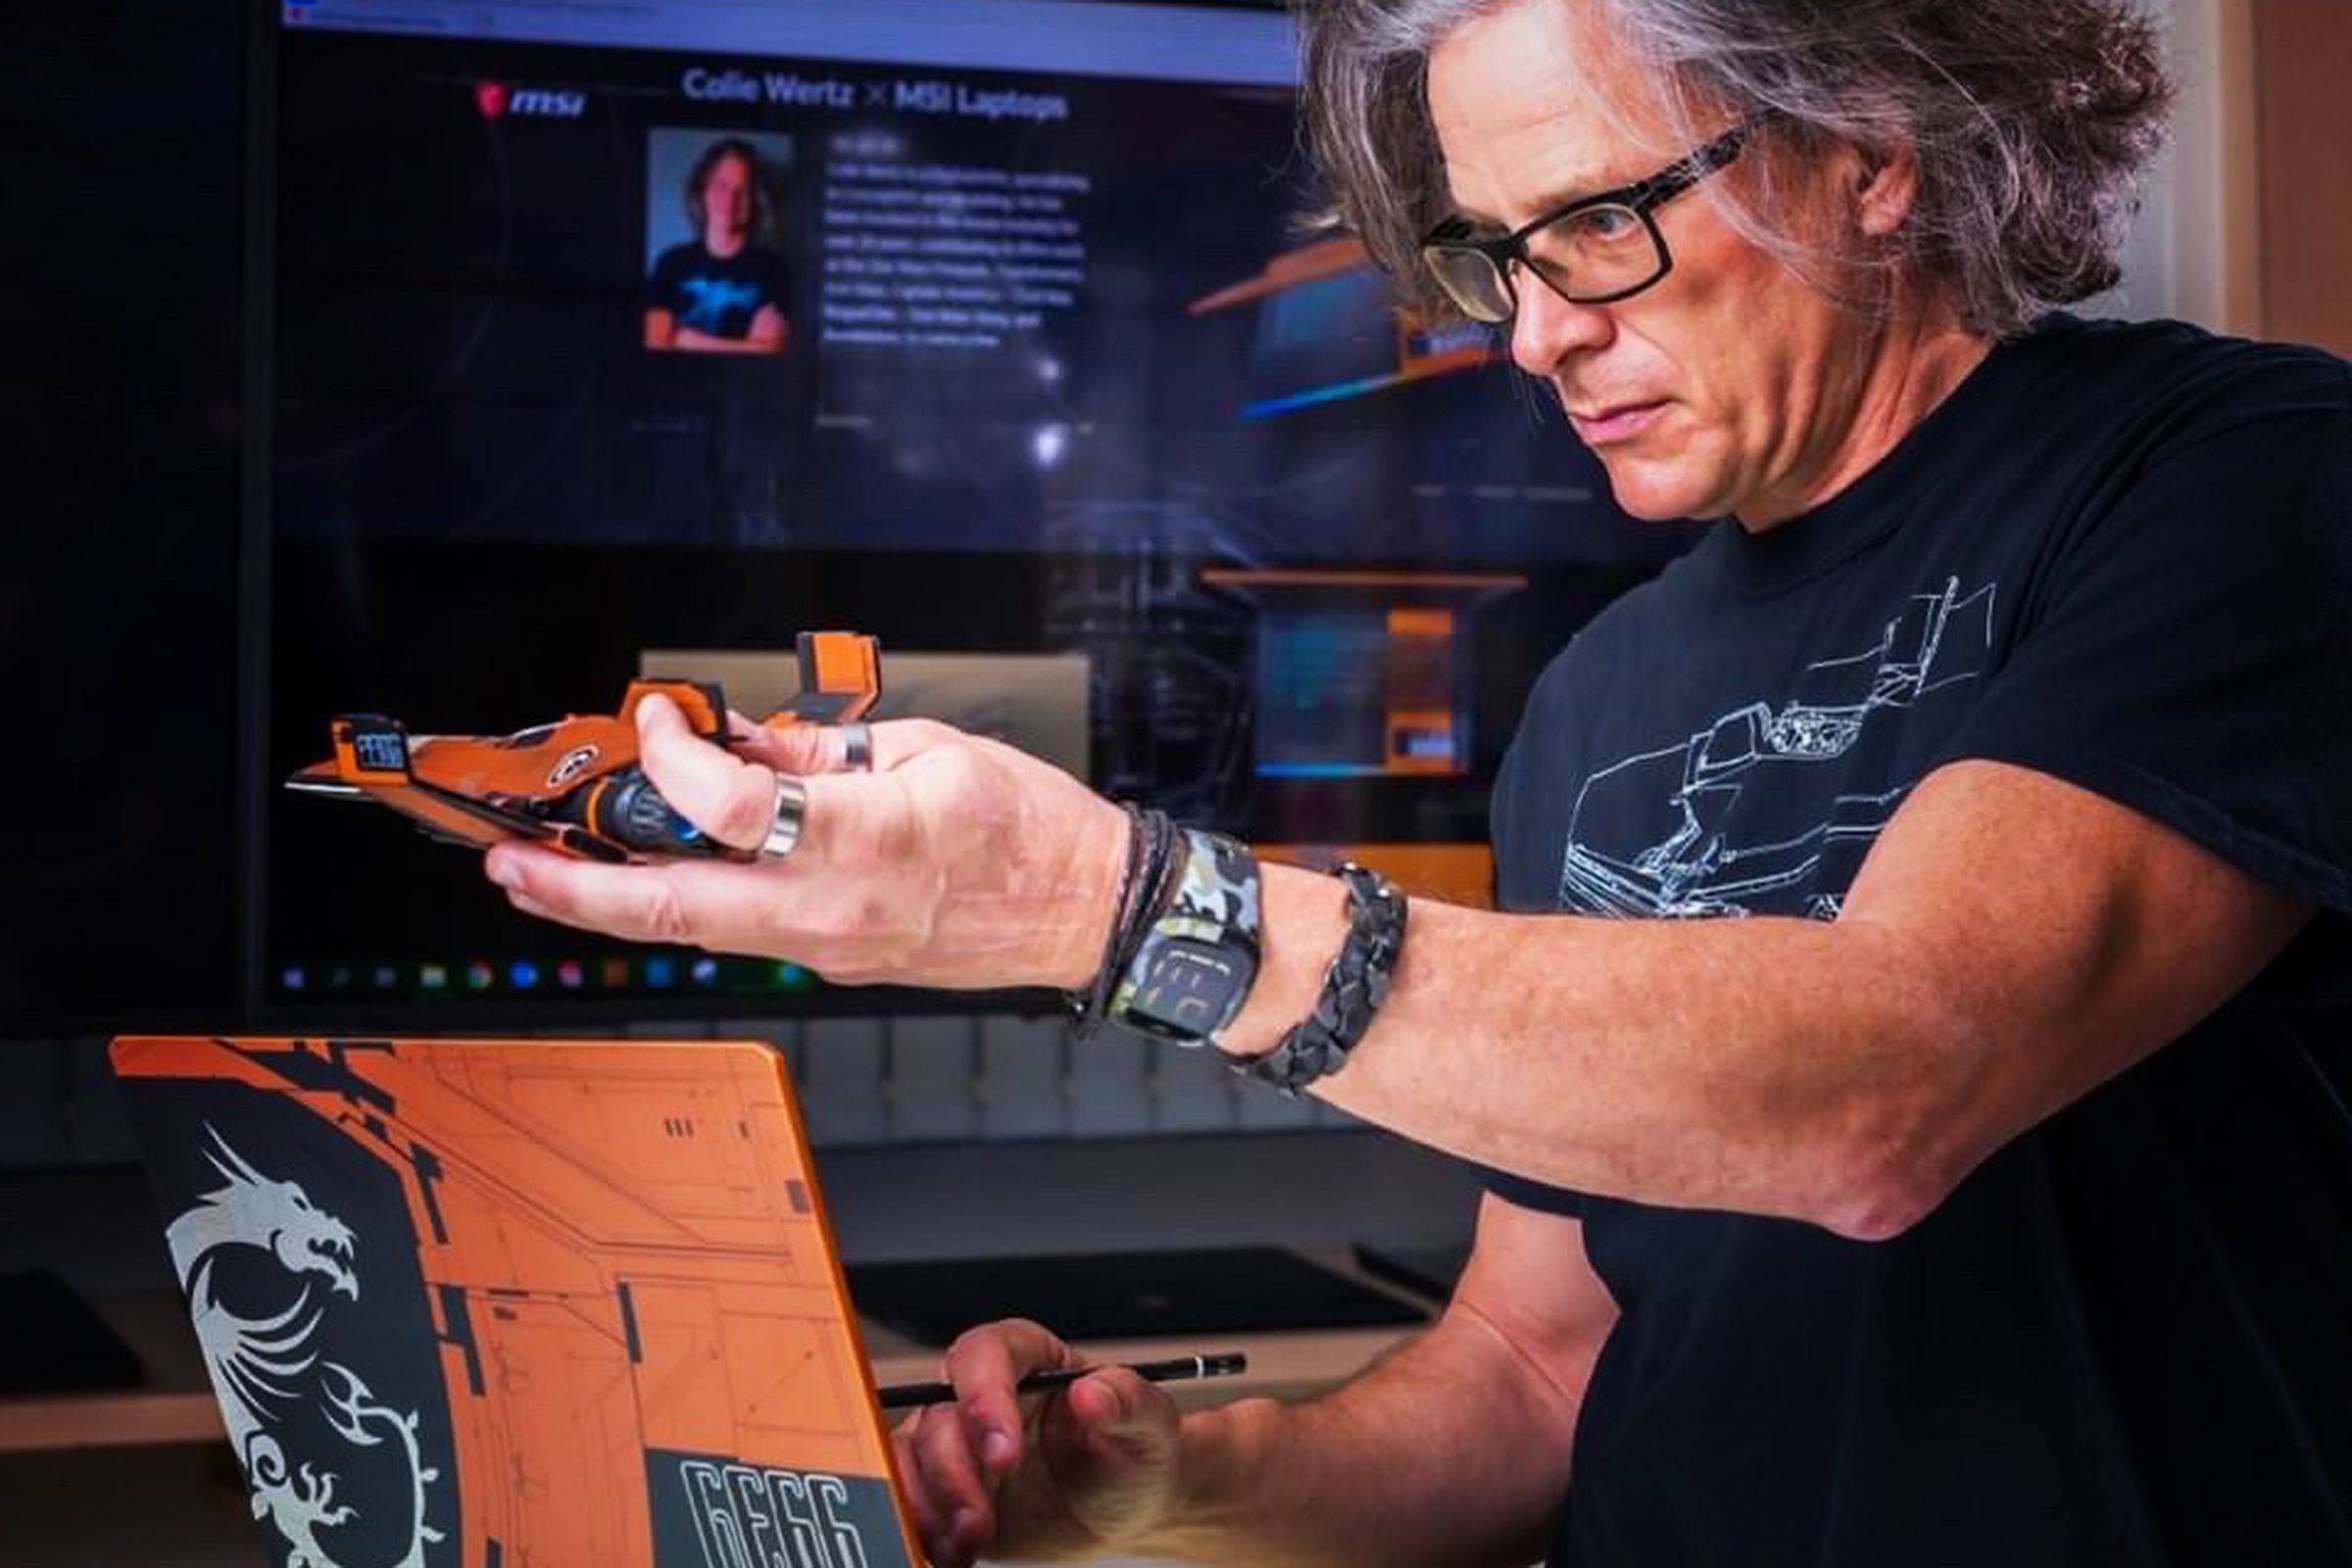 Colie Wertz uses the MSI GE66 Raider Dragonshield Edition while holding a model spaceship.